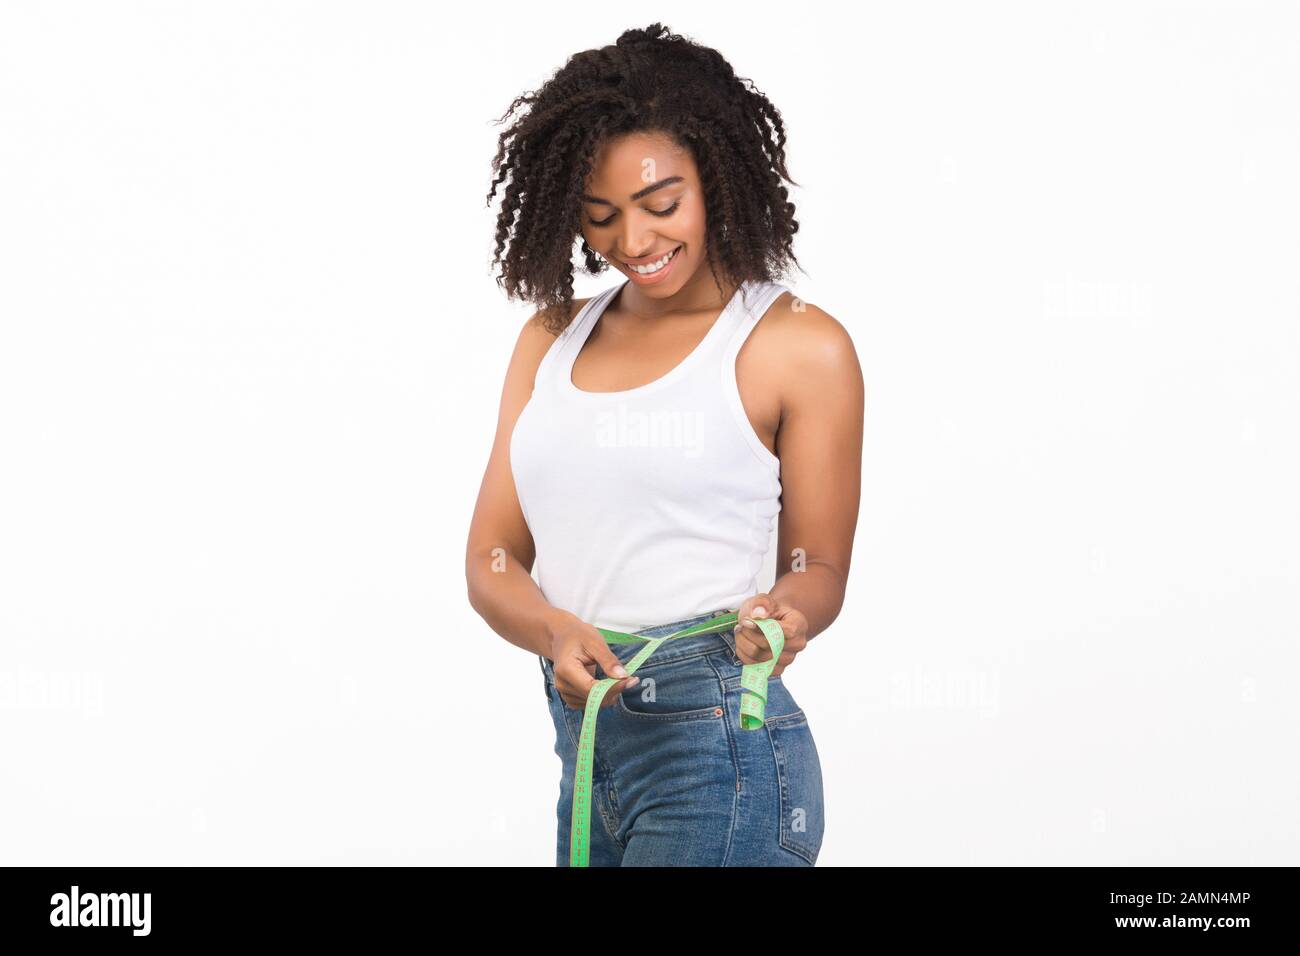 https://c8.alamy.com/comp/2AMN4MP/portrait-of-happy-young-black-woman-with-measuring-tape-2AMN4MP.jpg